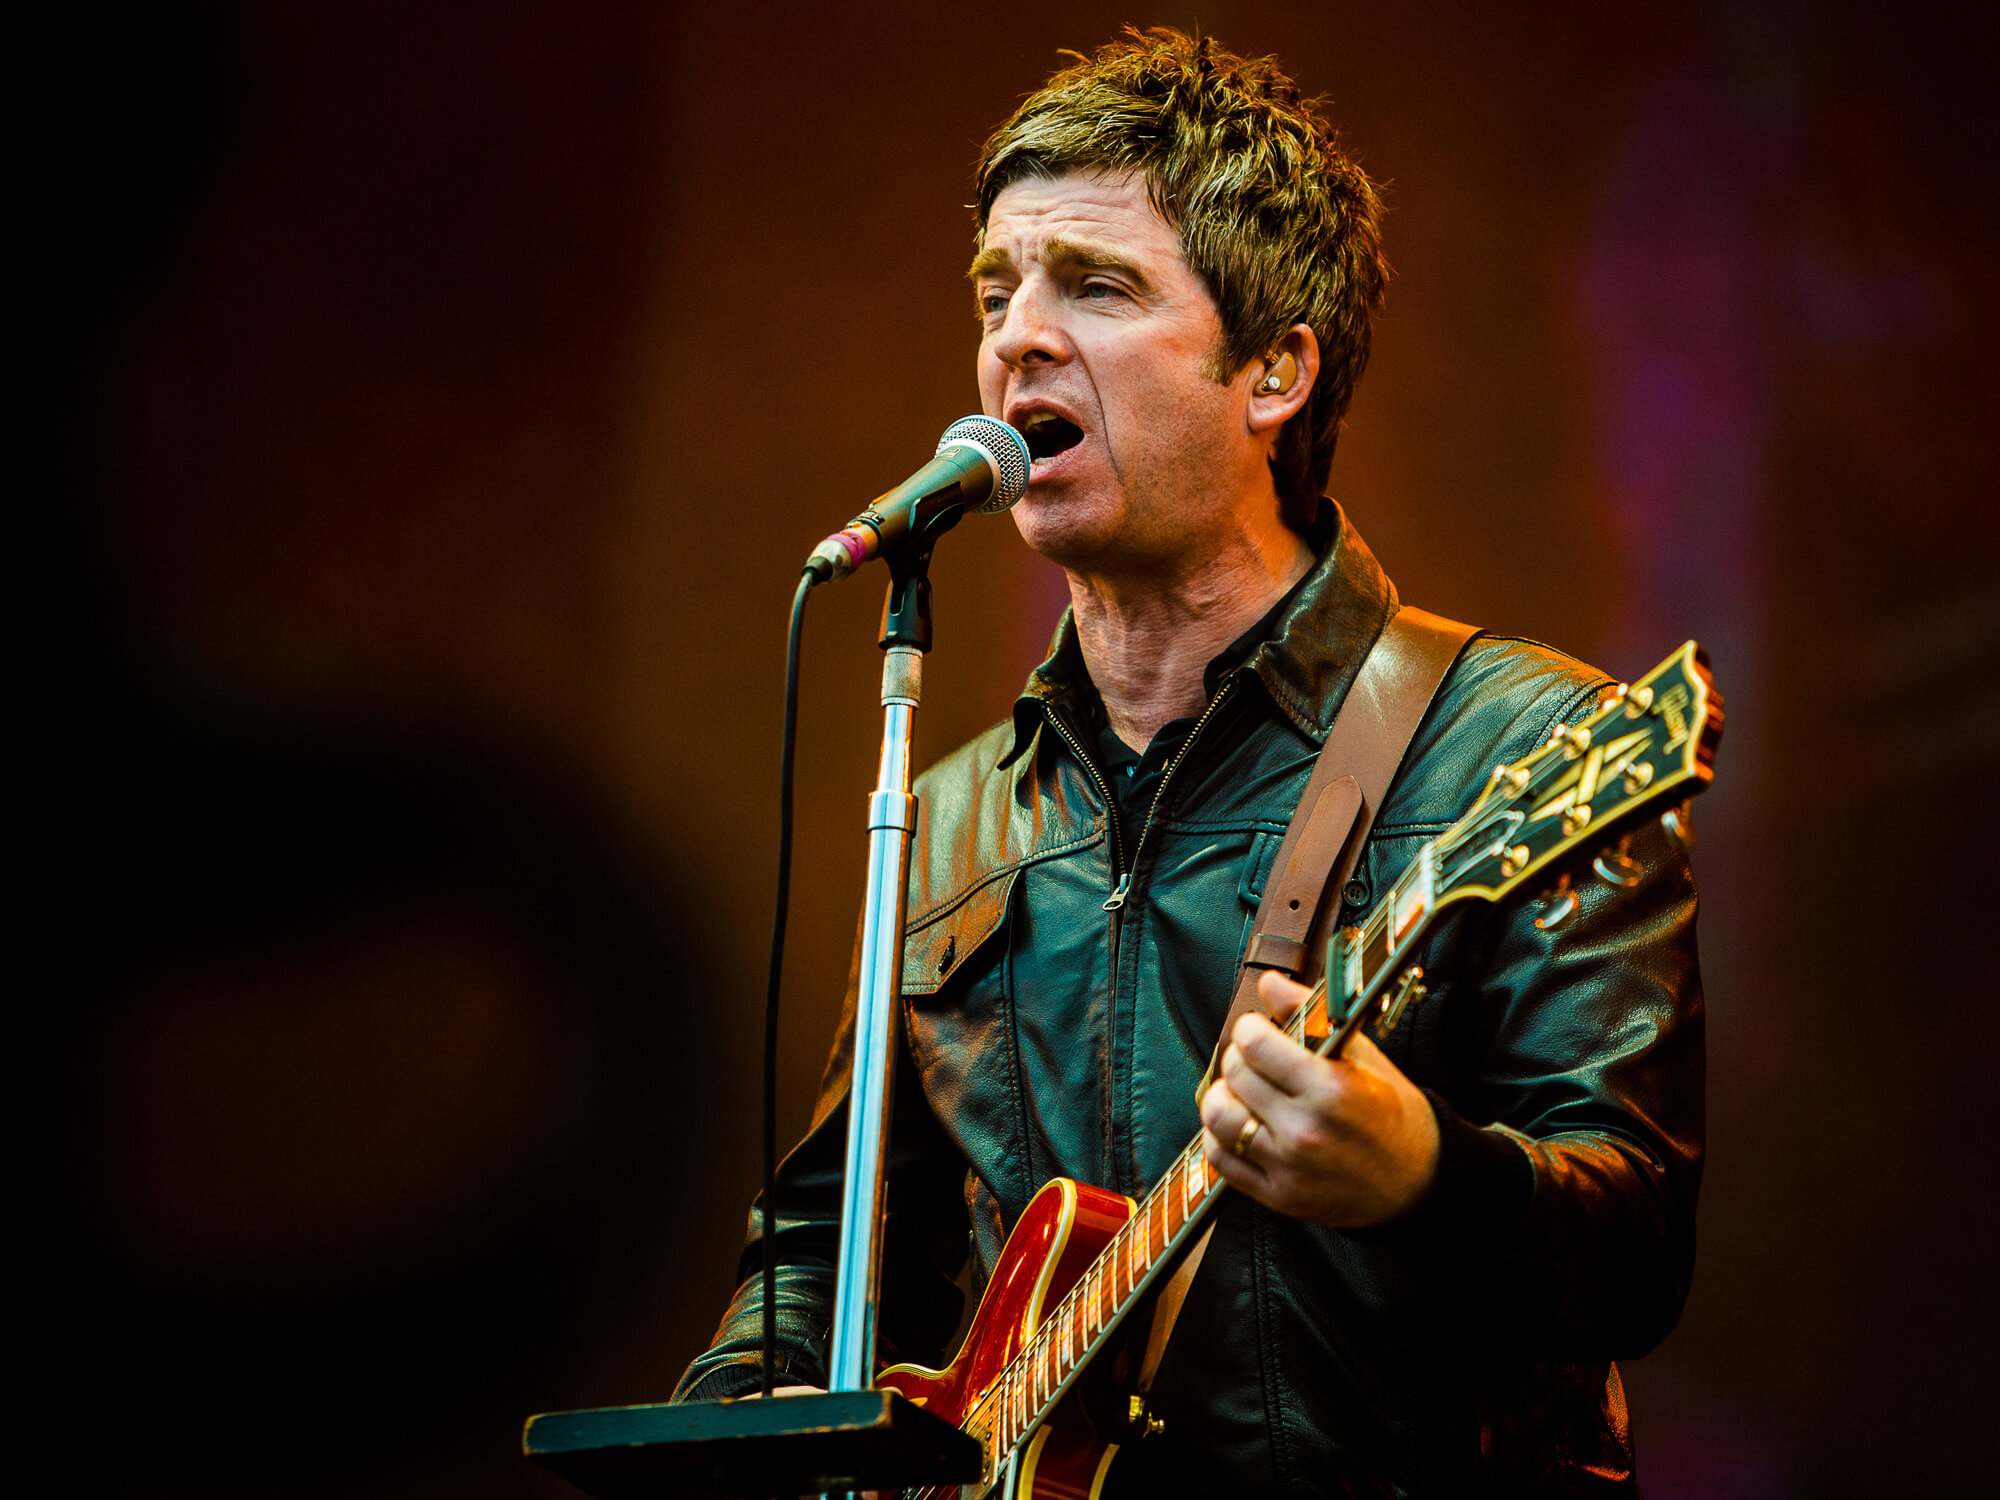 Noel Gallagher playing Guitar